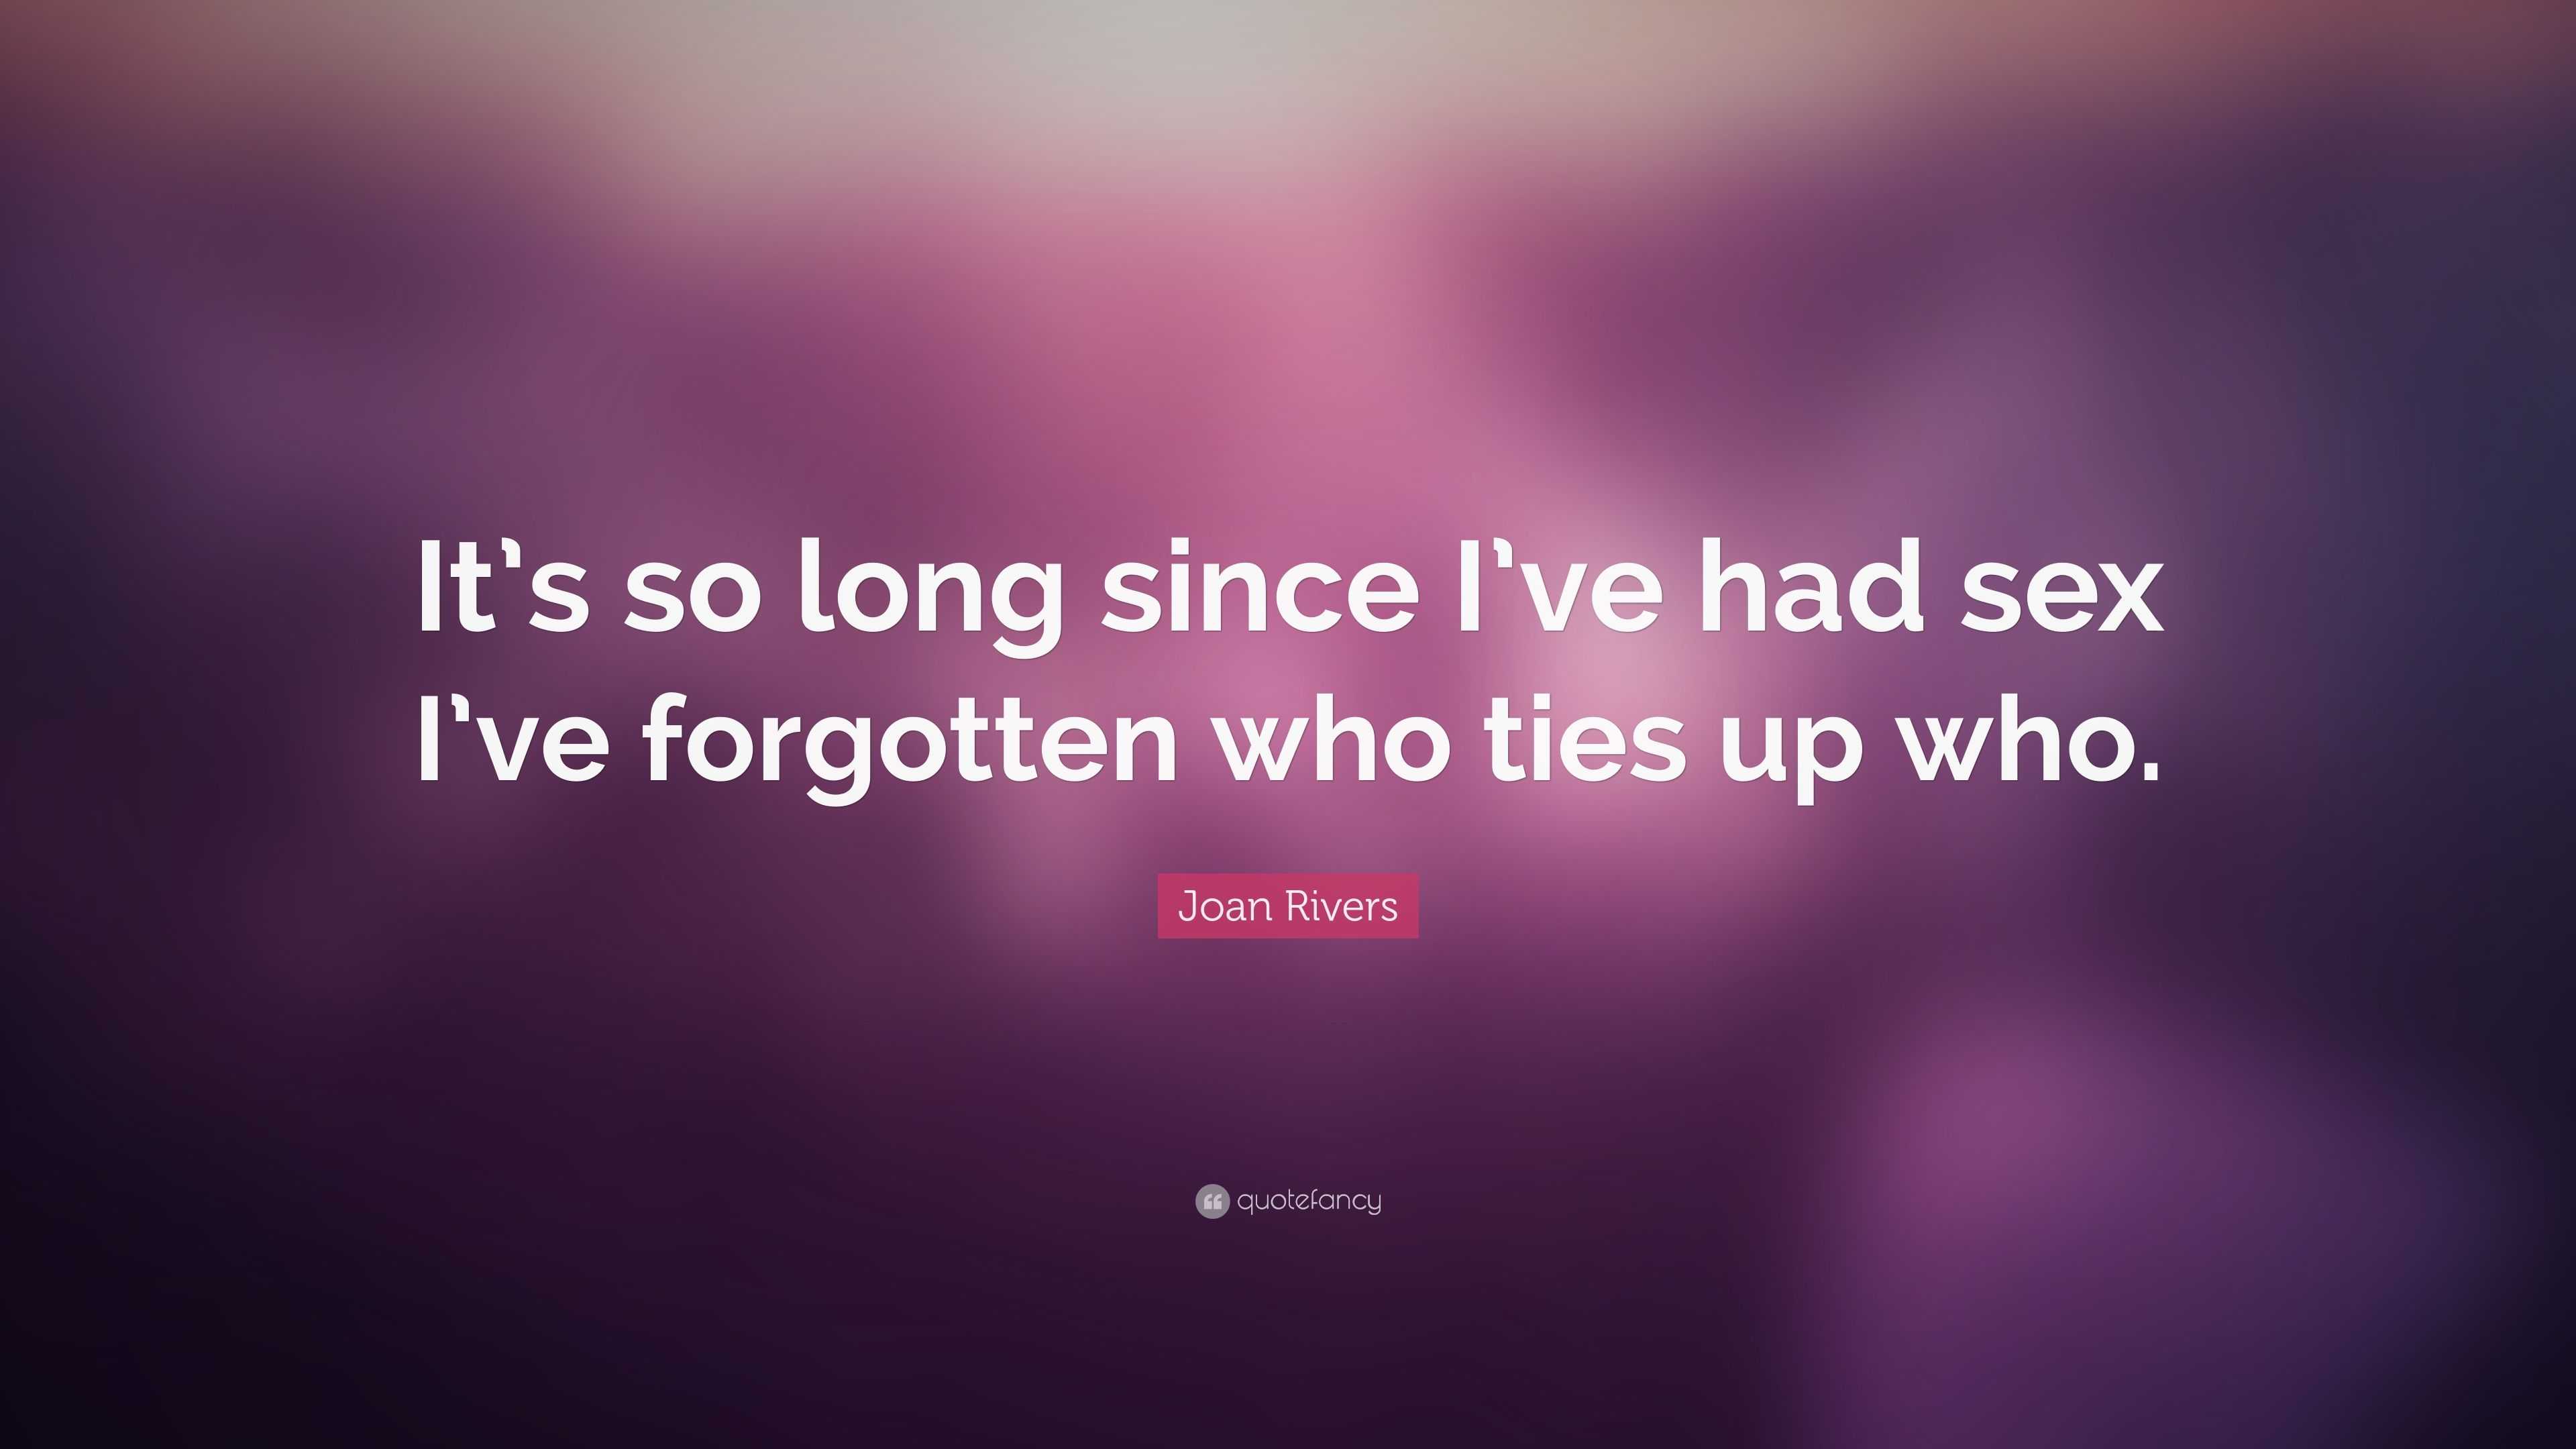 Joan Rivers Quote “it S So Long Since I Ve Had Sex I Ve Forgotten Who Ties Up Who ”